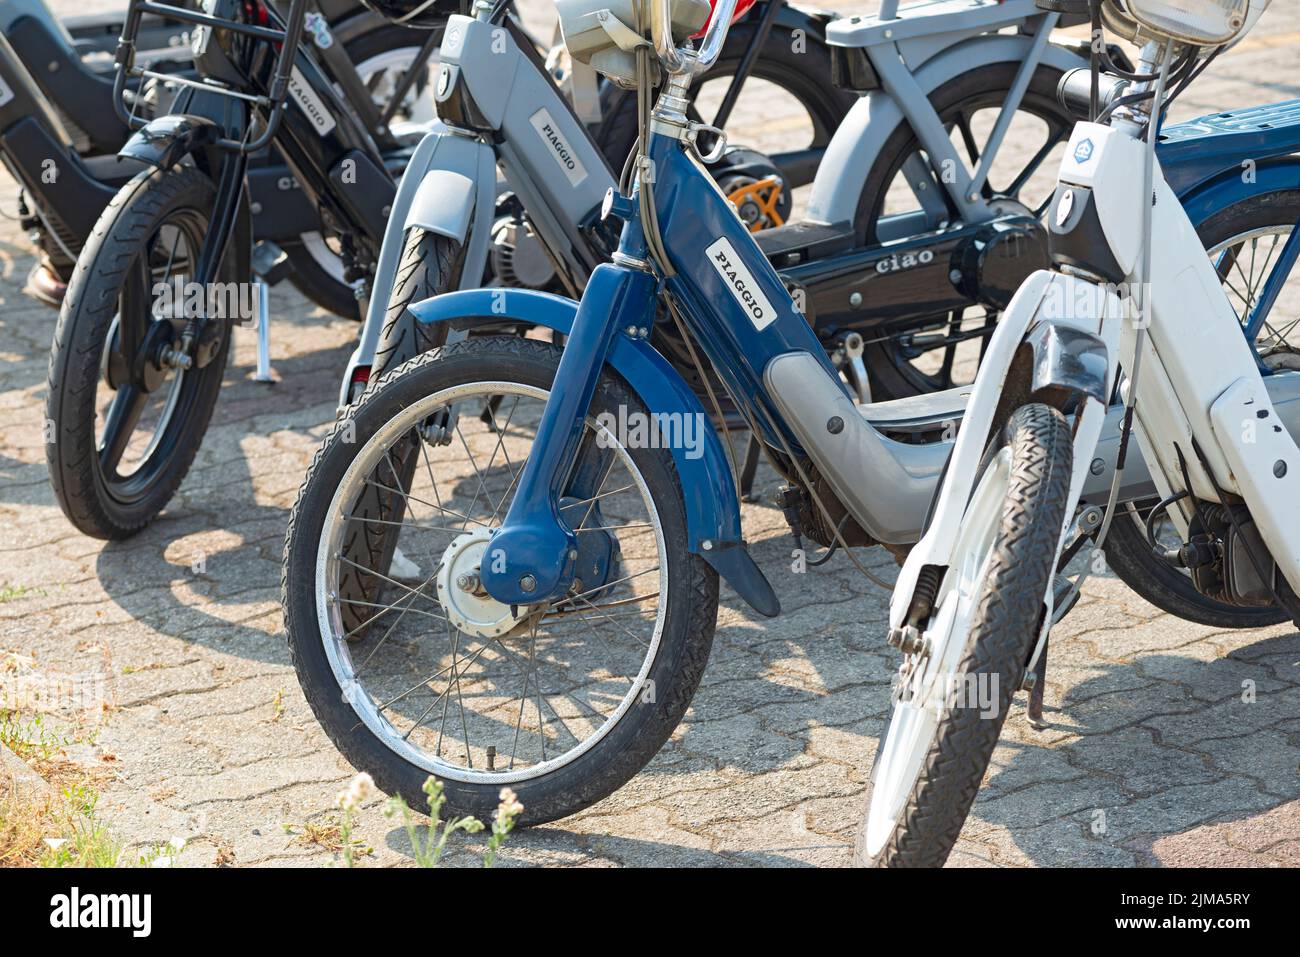 Italy, Lombardy, Meeting of Old Motorbike, Piaggio Ciao Moped Stock Photo